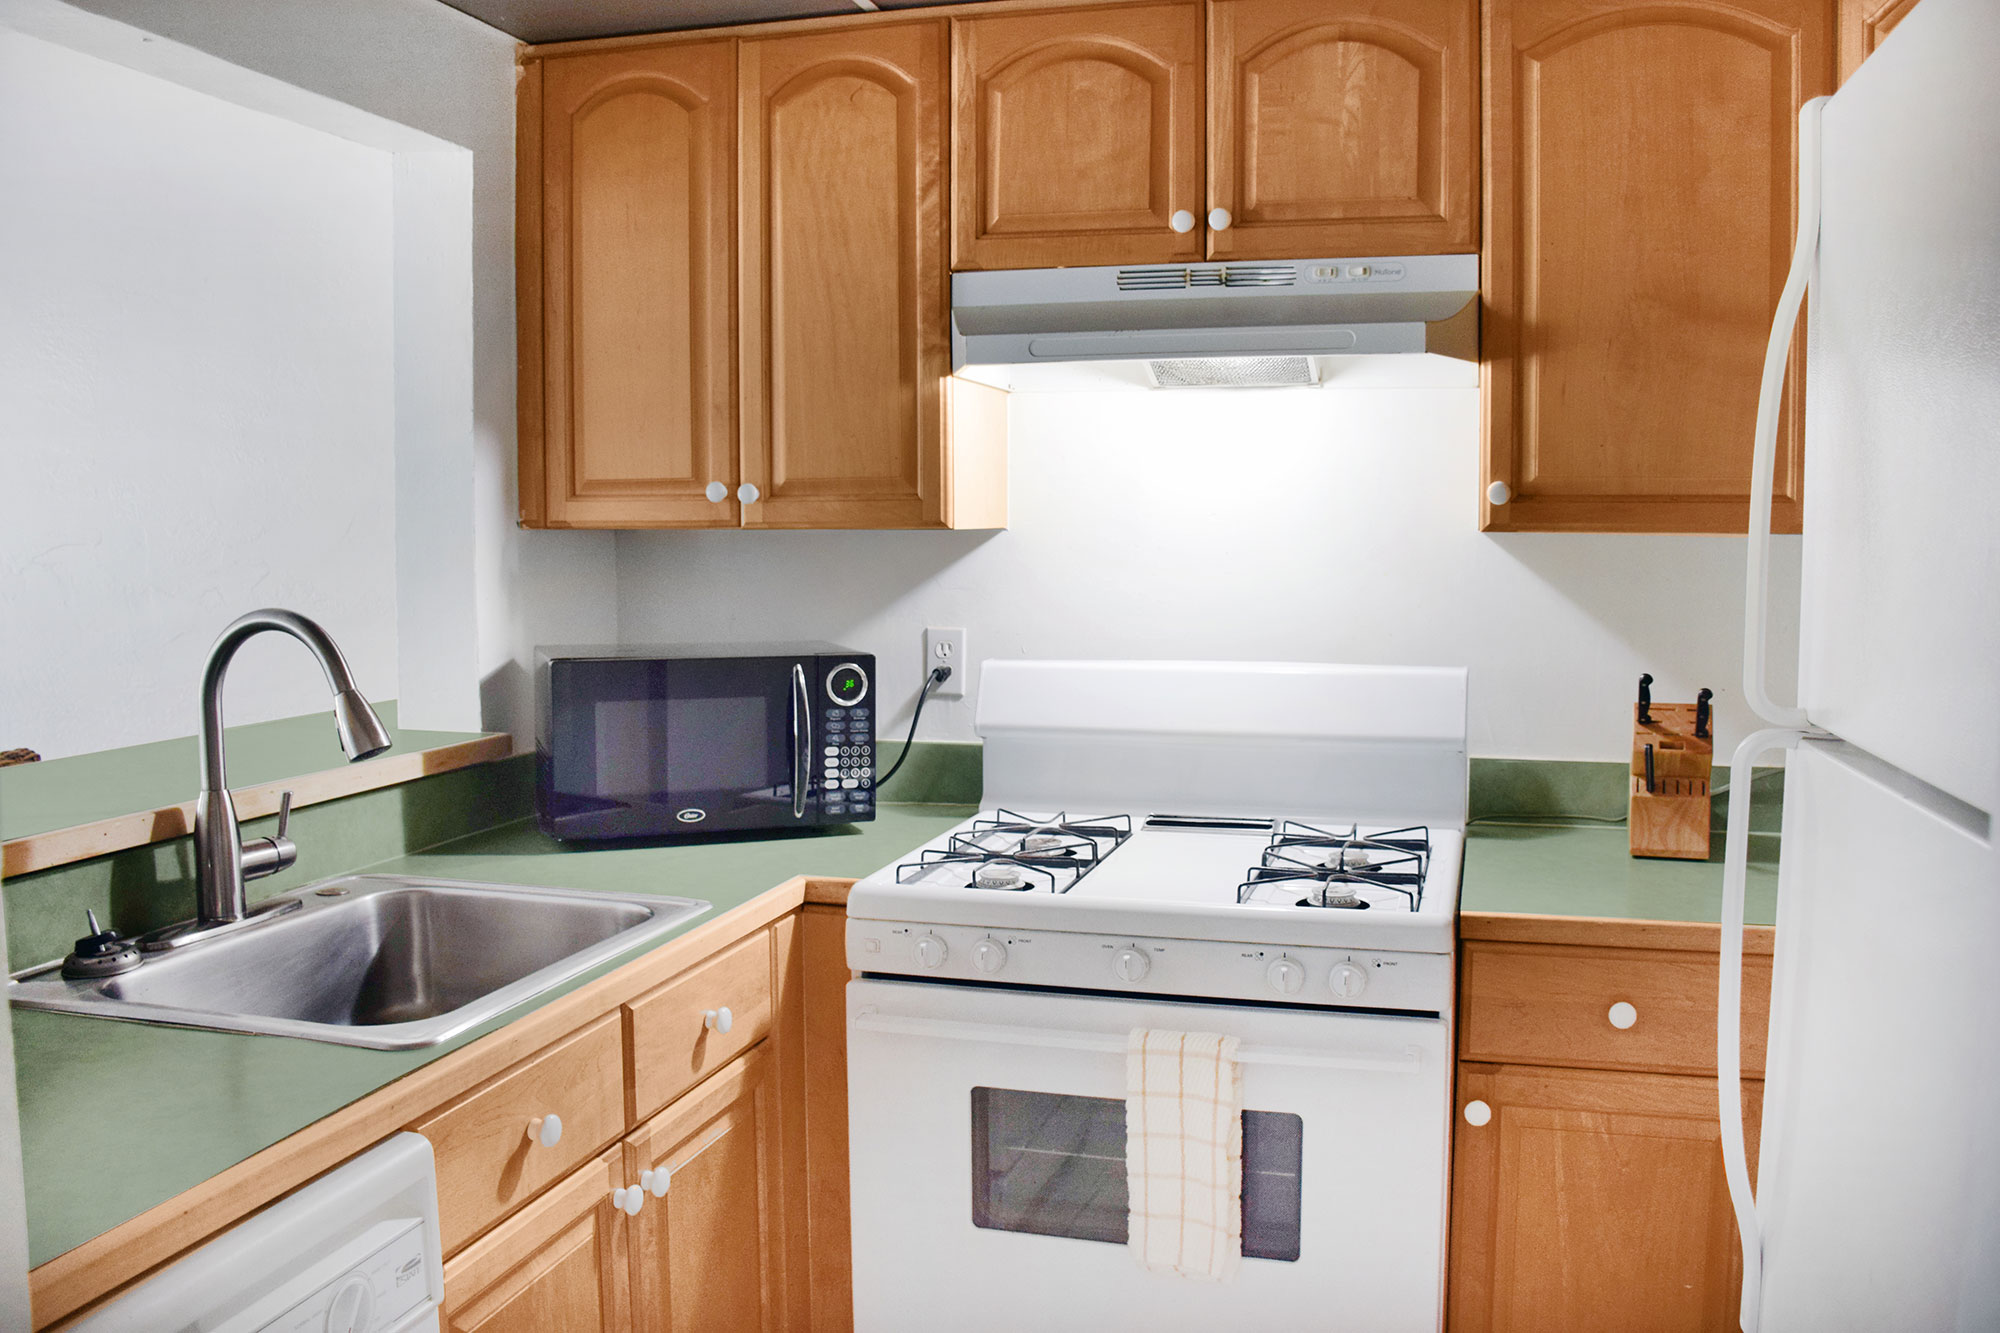 Kitchen of apartment at Coral Reef Key Biscayne